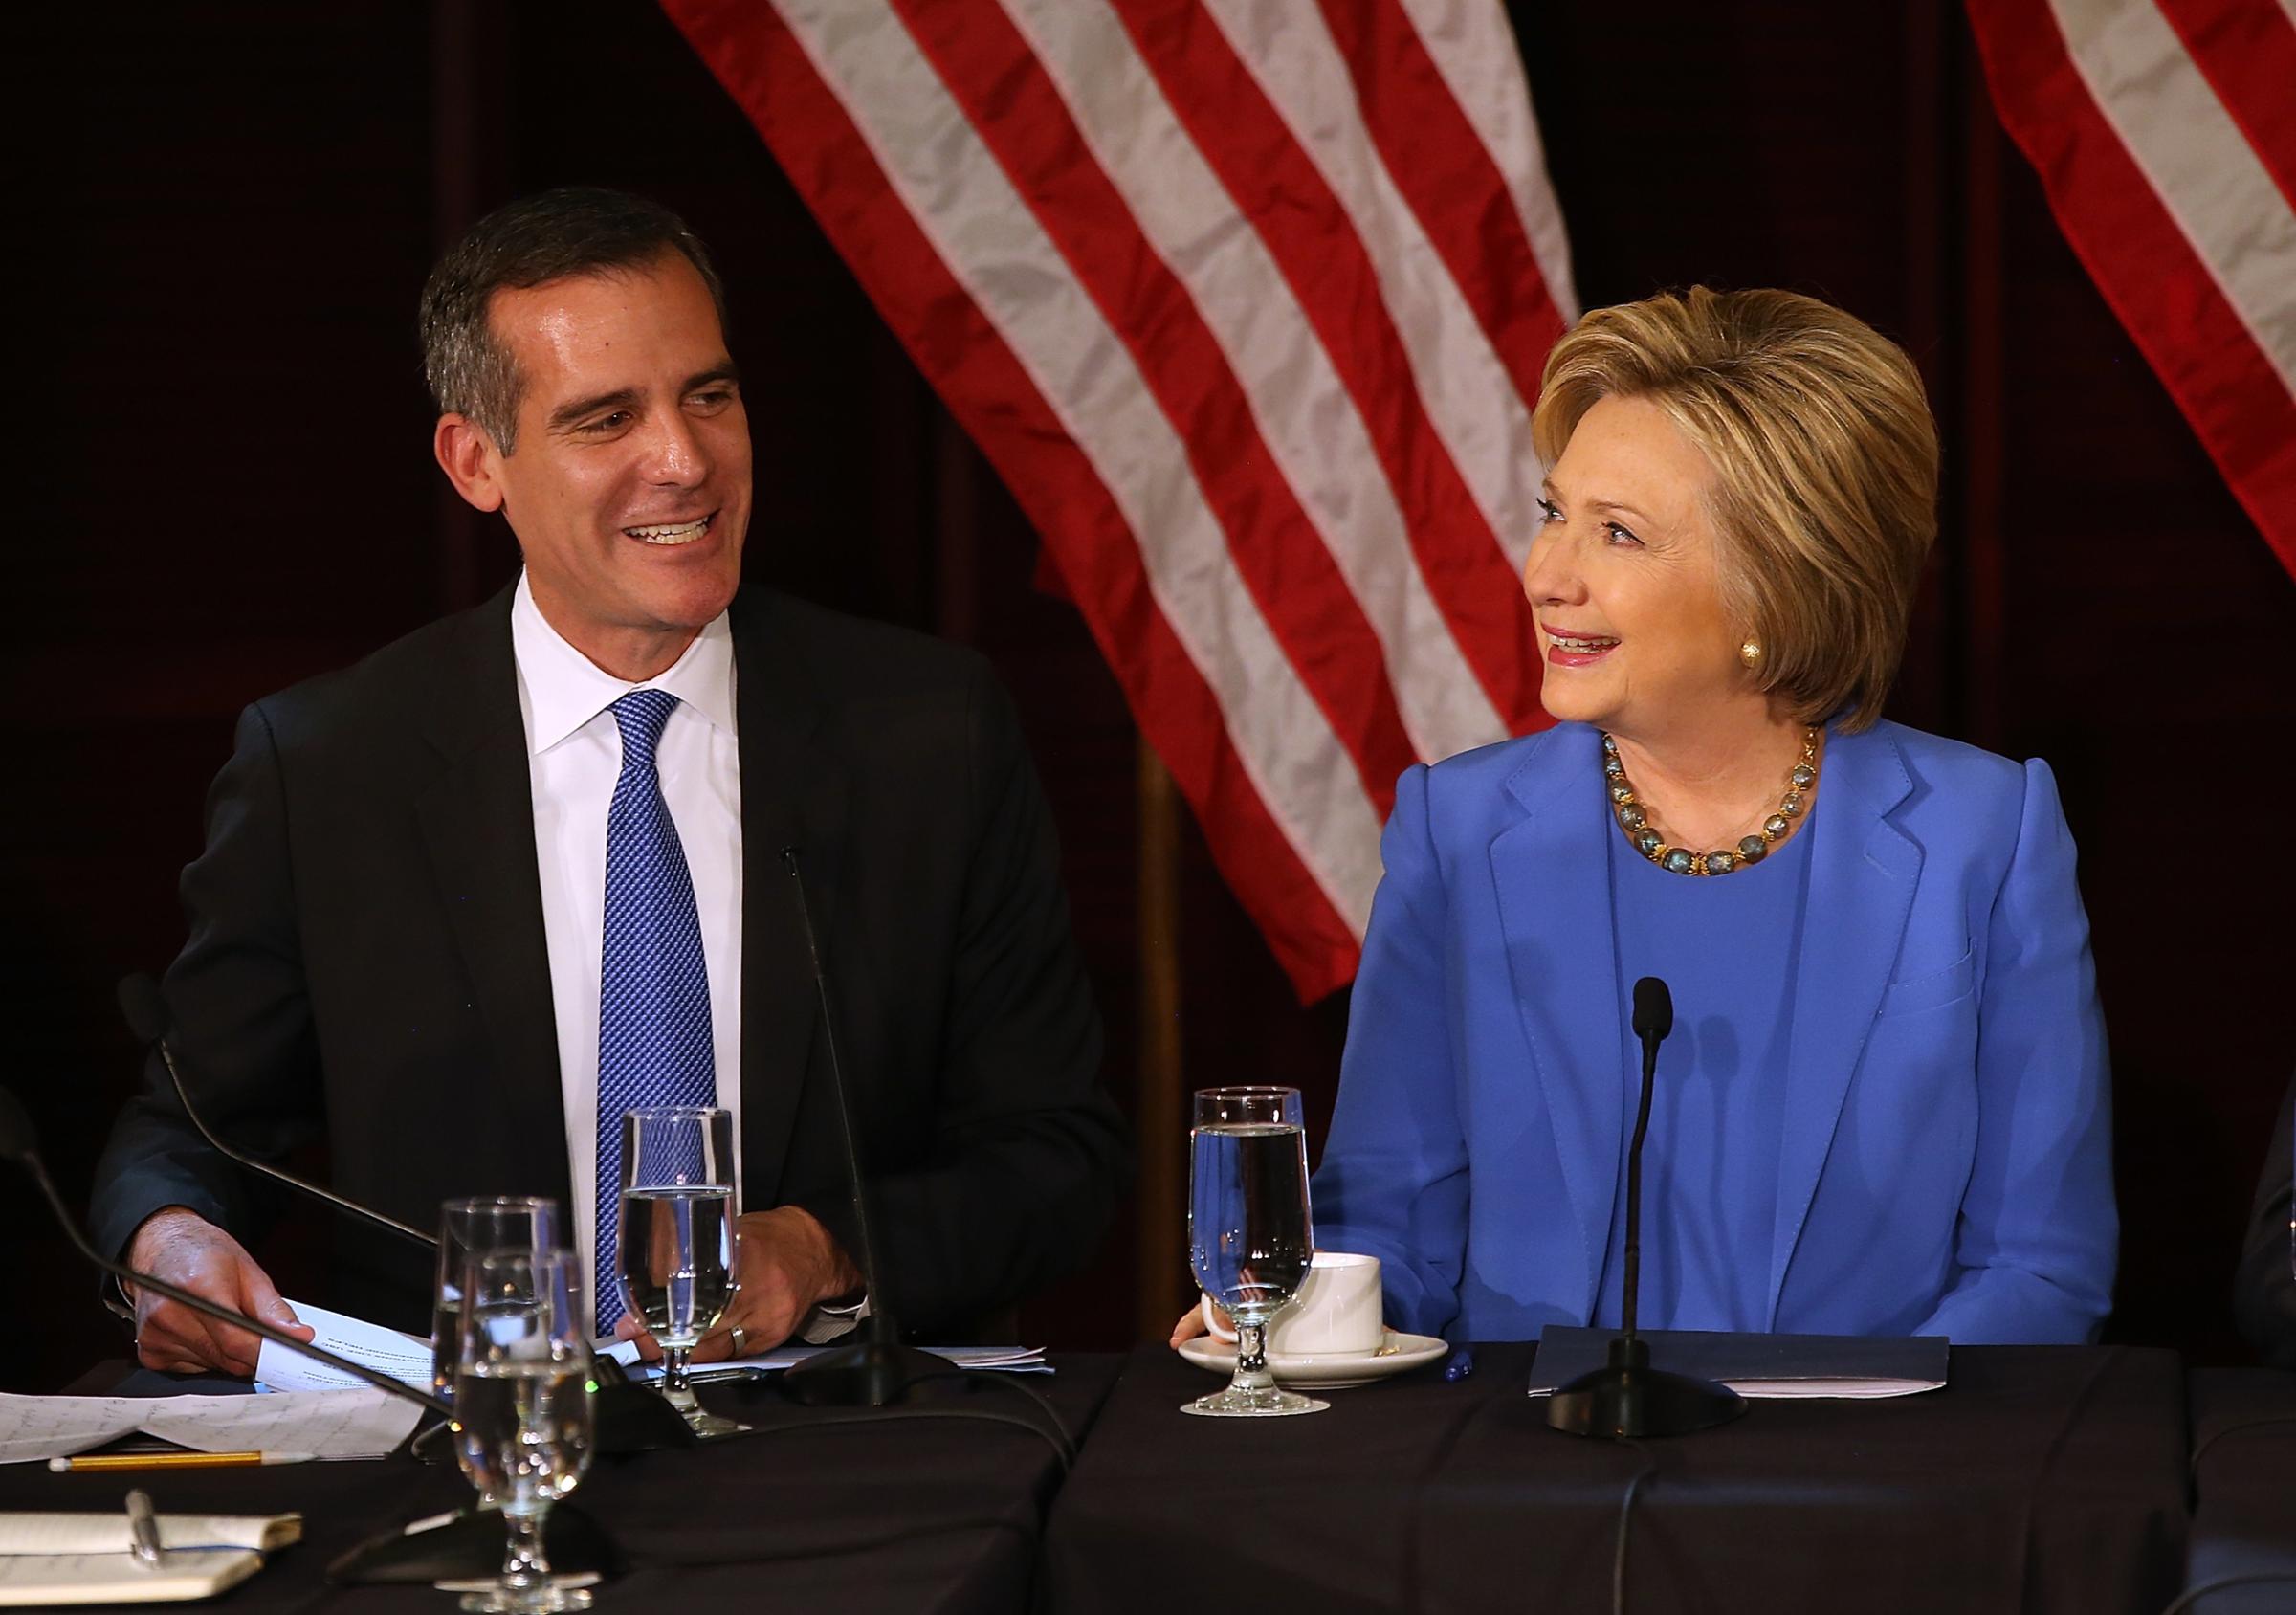 Democratic presidential candidate former Secretary of State Hillary Clinton talks with Los Angeles mayor Eric Garcetti during a roundtable discussion at the University of Southern California in Los Angeles, on March 24, 2016.